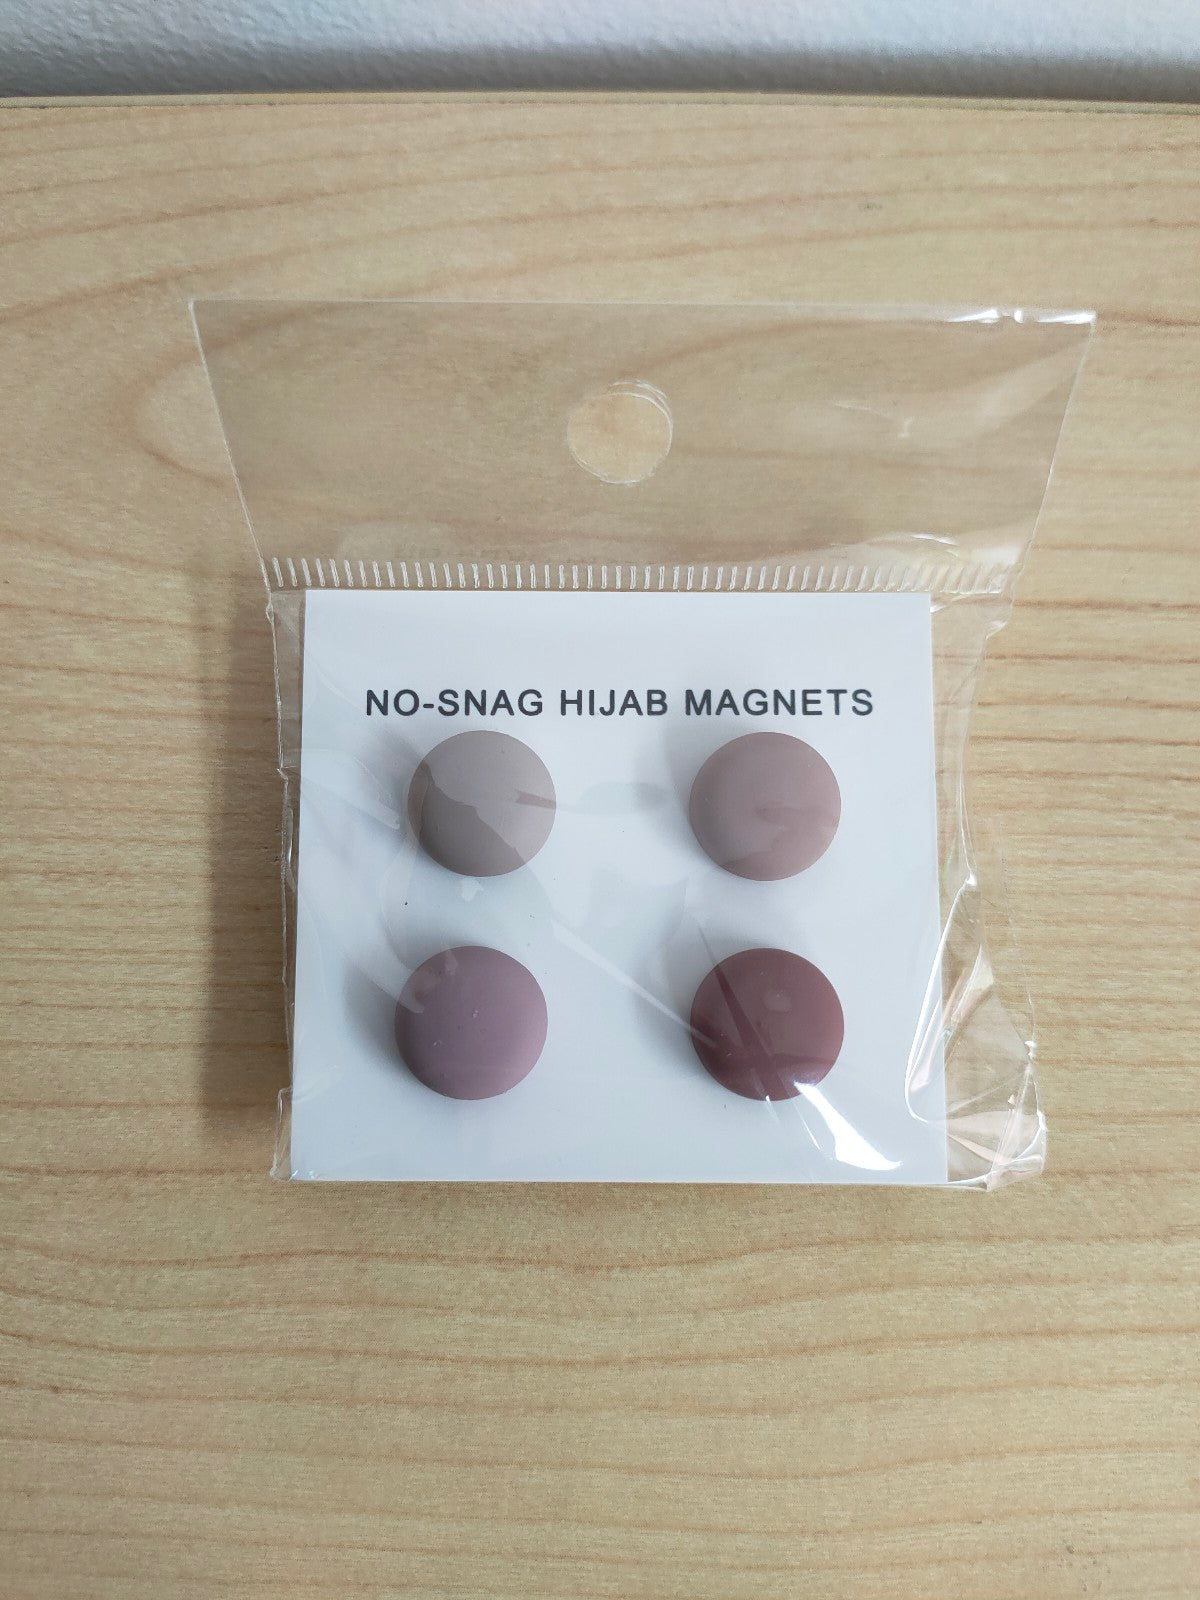 Discover our Dusty Pink Hijab Magnets at Hikmah Boutique. Strong hold, elegant design. Perfect for all hijab styles. Shop now for premium quality!